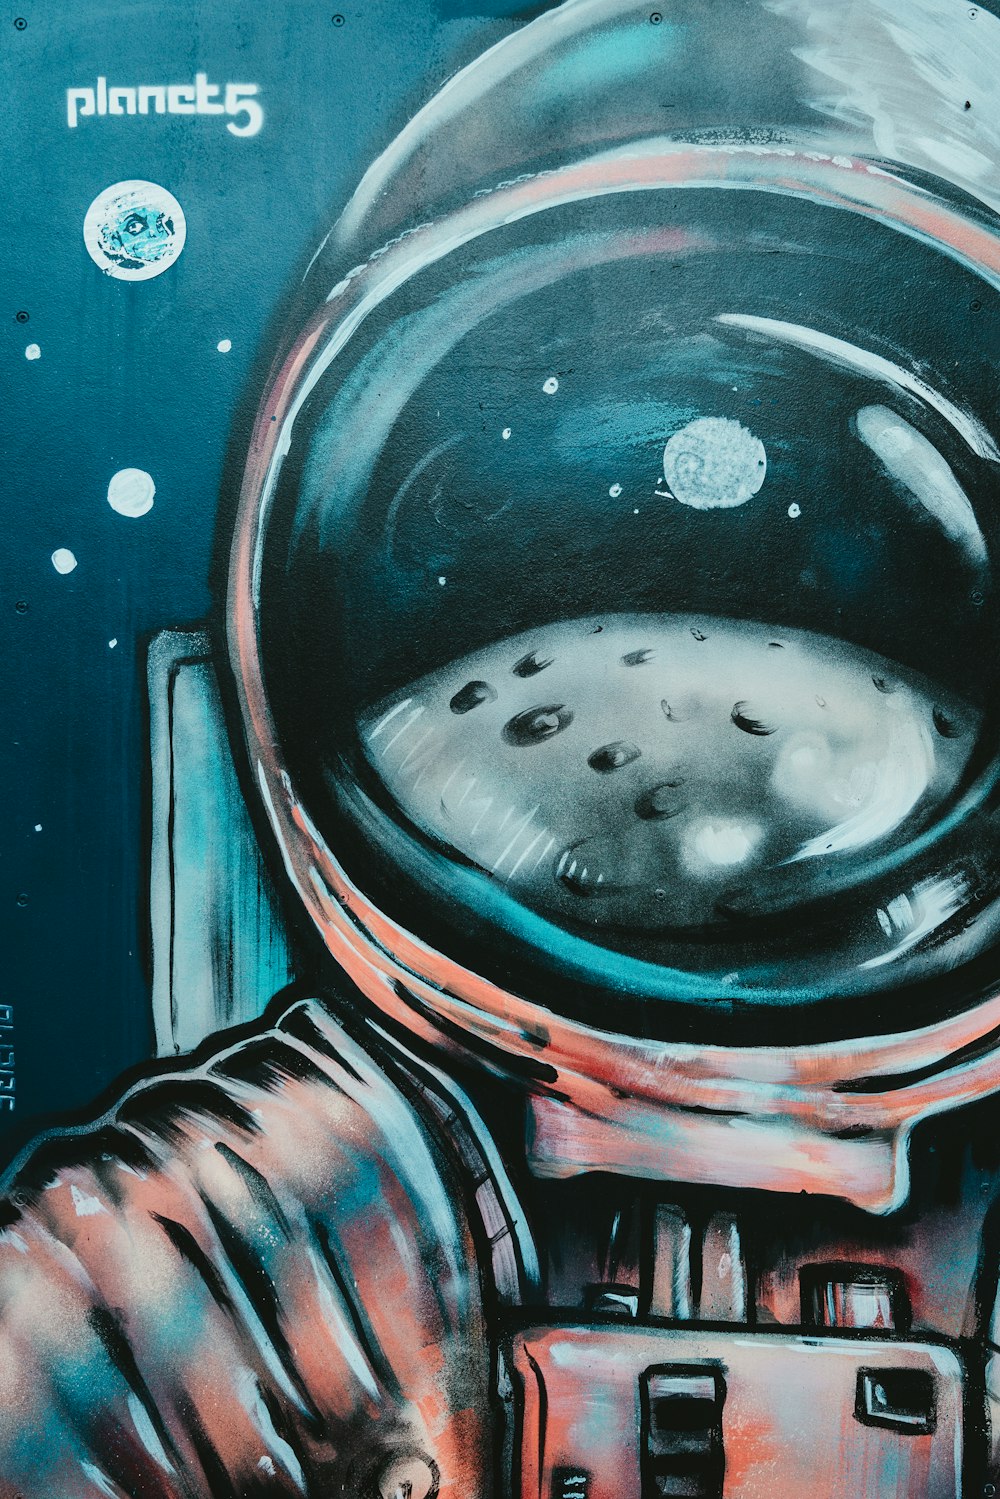 a painting of an astronaut in a space suit